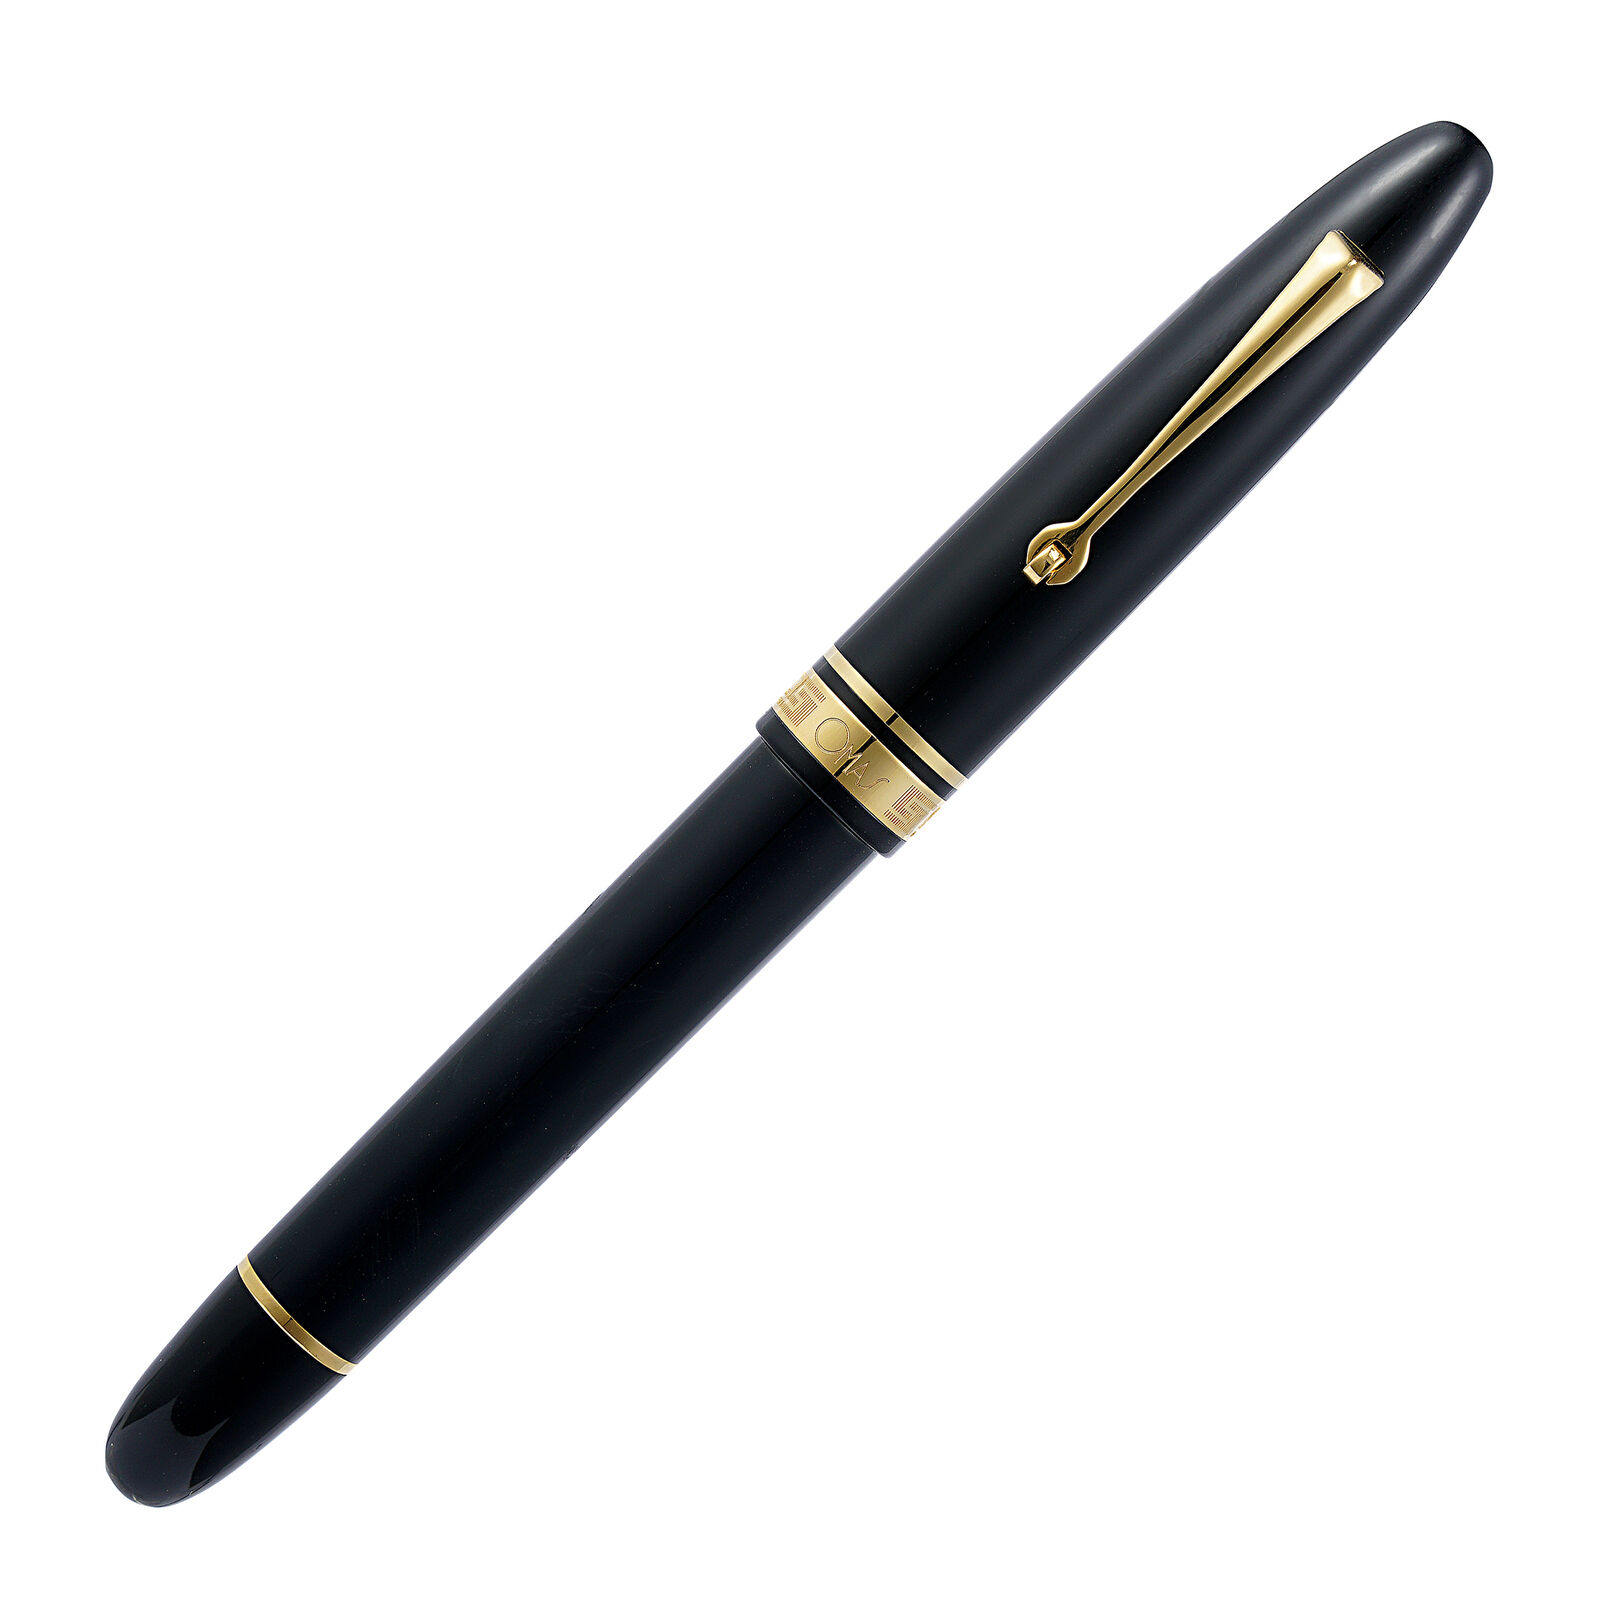 Omas Ogiva Fountain Pen in Nera with Gold Trim - Fine Point - NEW in Box